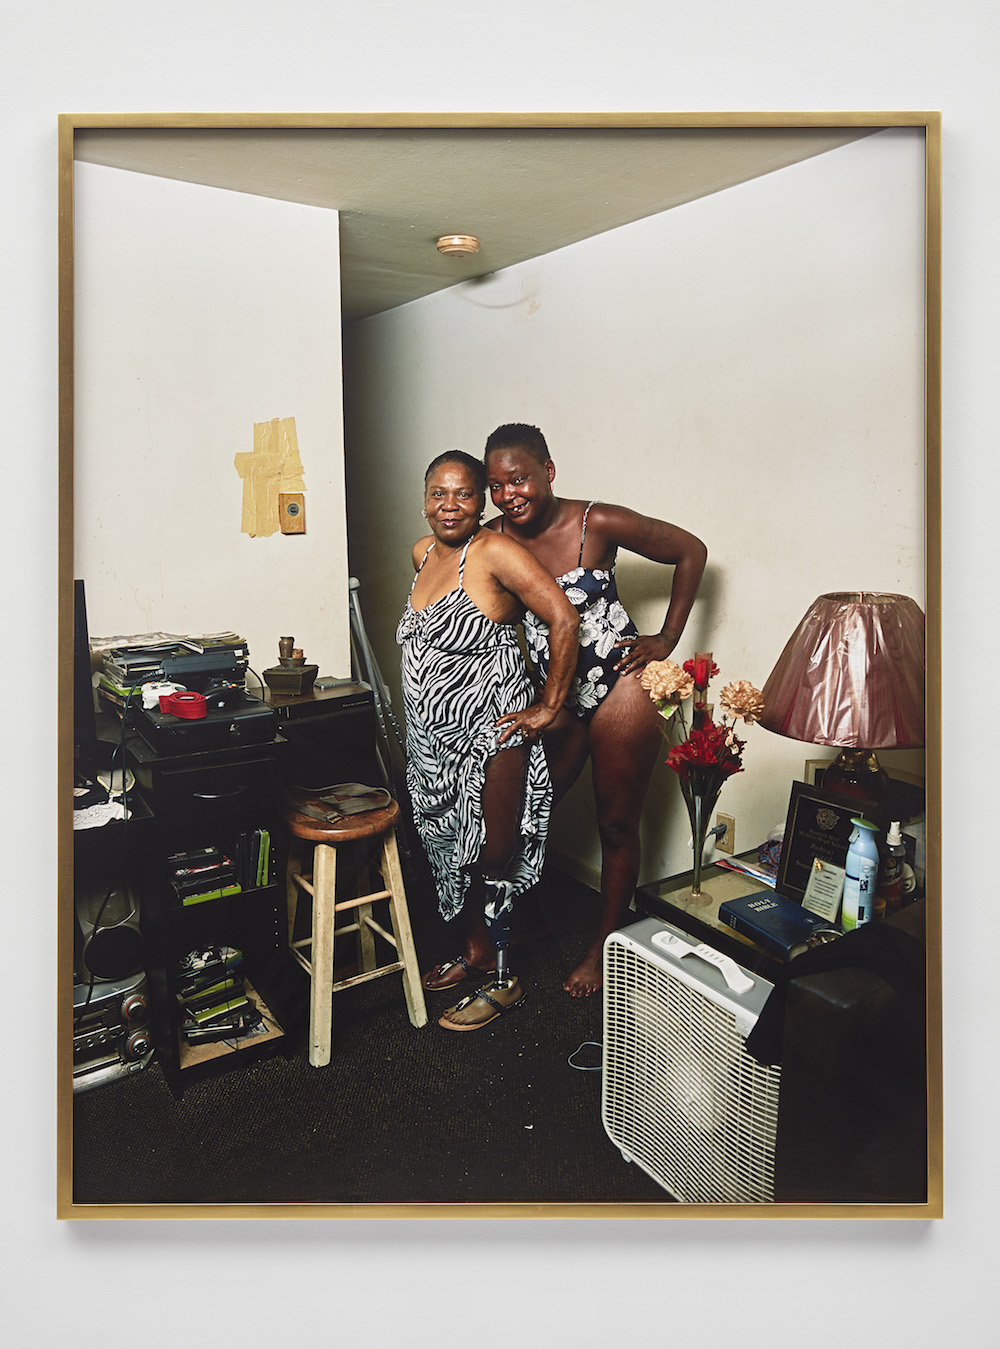 A color photograph shows two Black women posing together in cluttered living space. One raises her zebra-print dress to expose a prosthetic leg. The other is in a floral swimsuit. Both have their hair pulled back and smile toward the viewer.